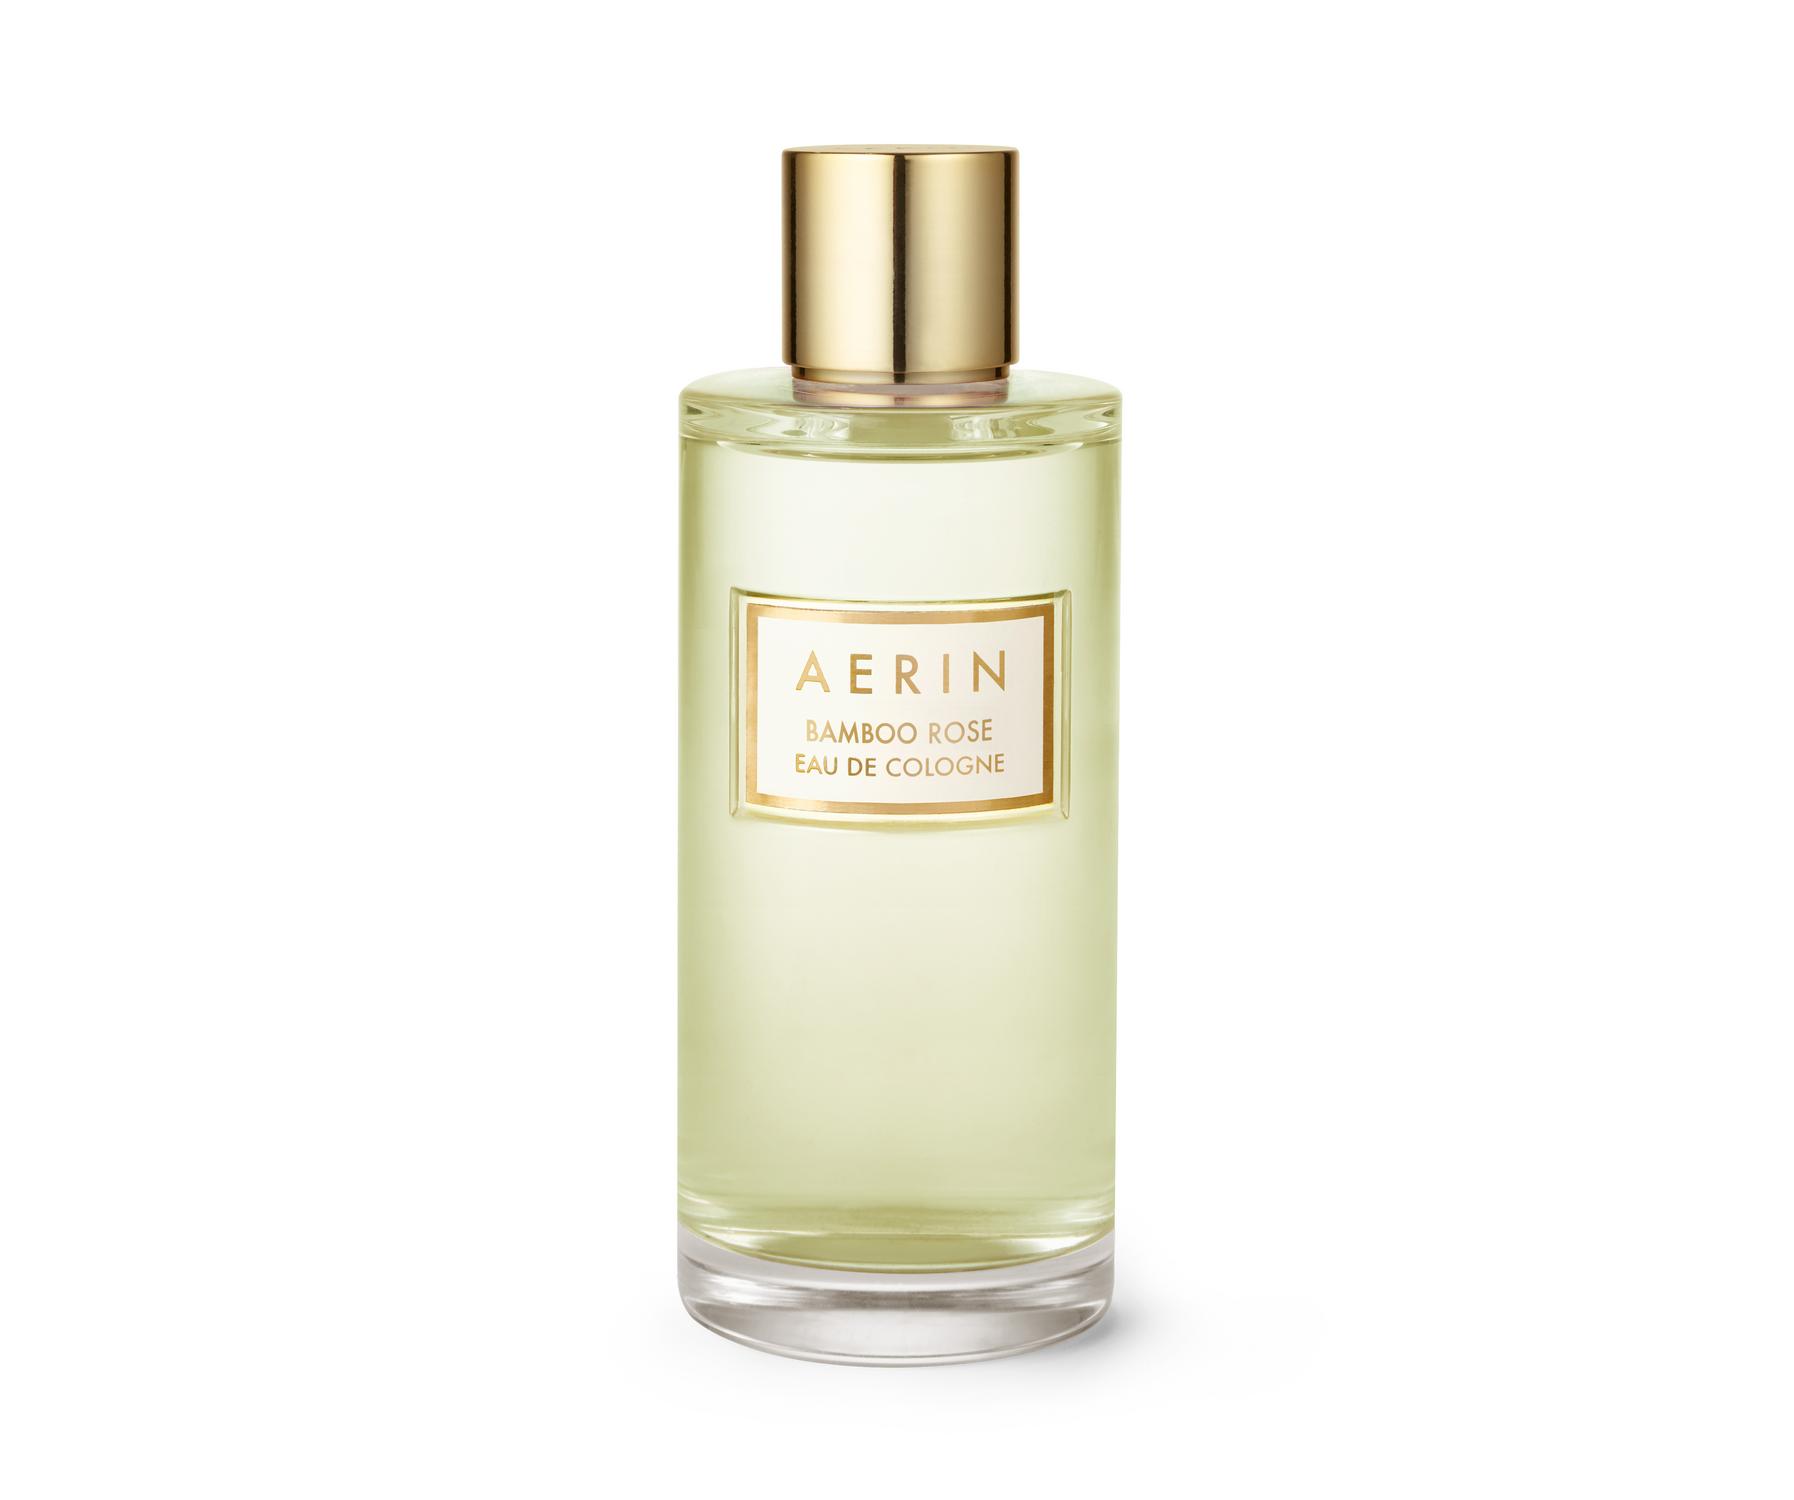 7 Irresistible Fragrances for a Night Out